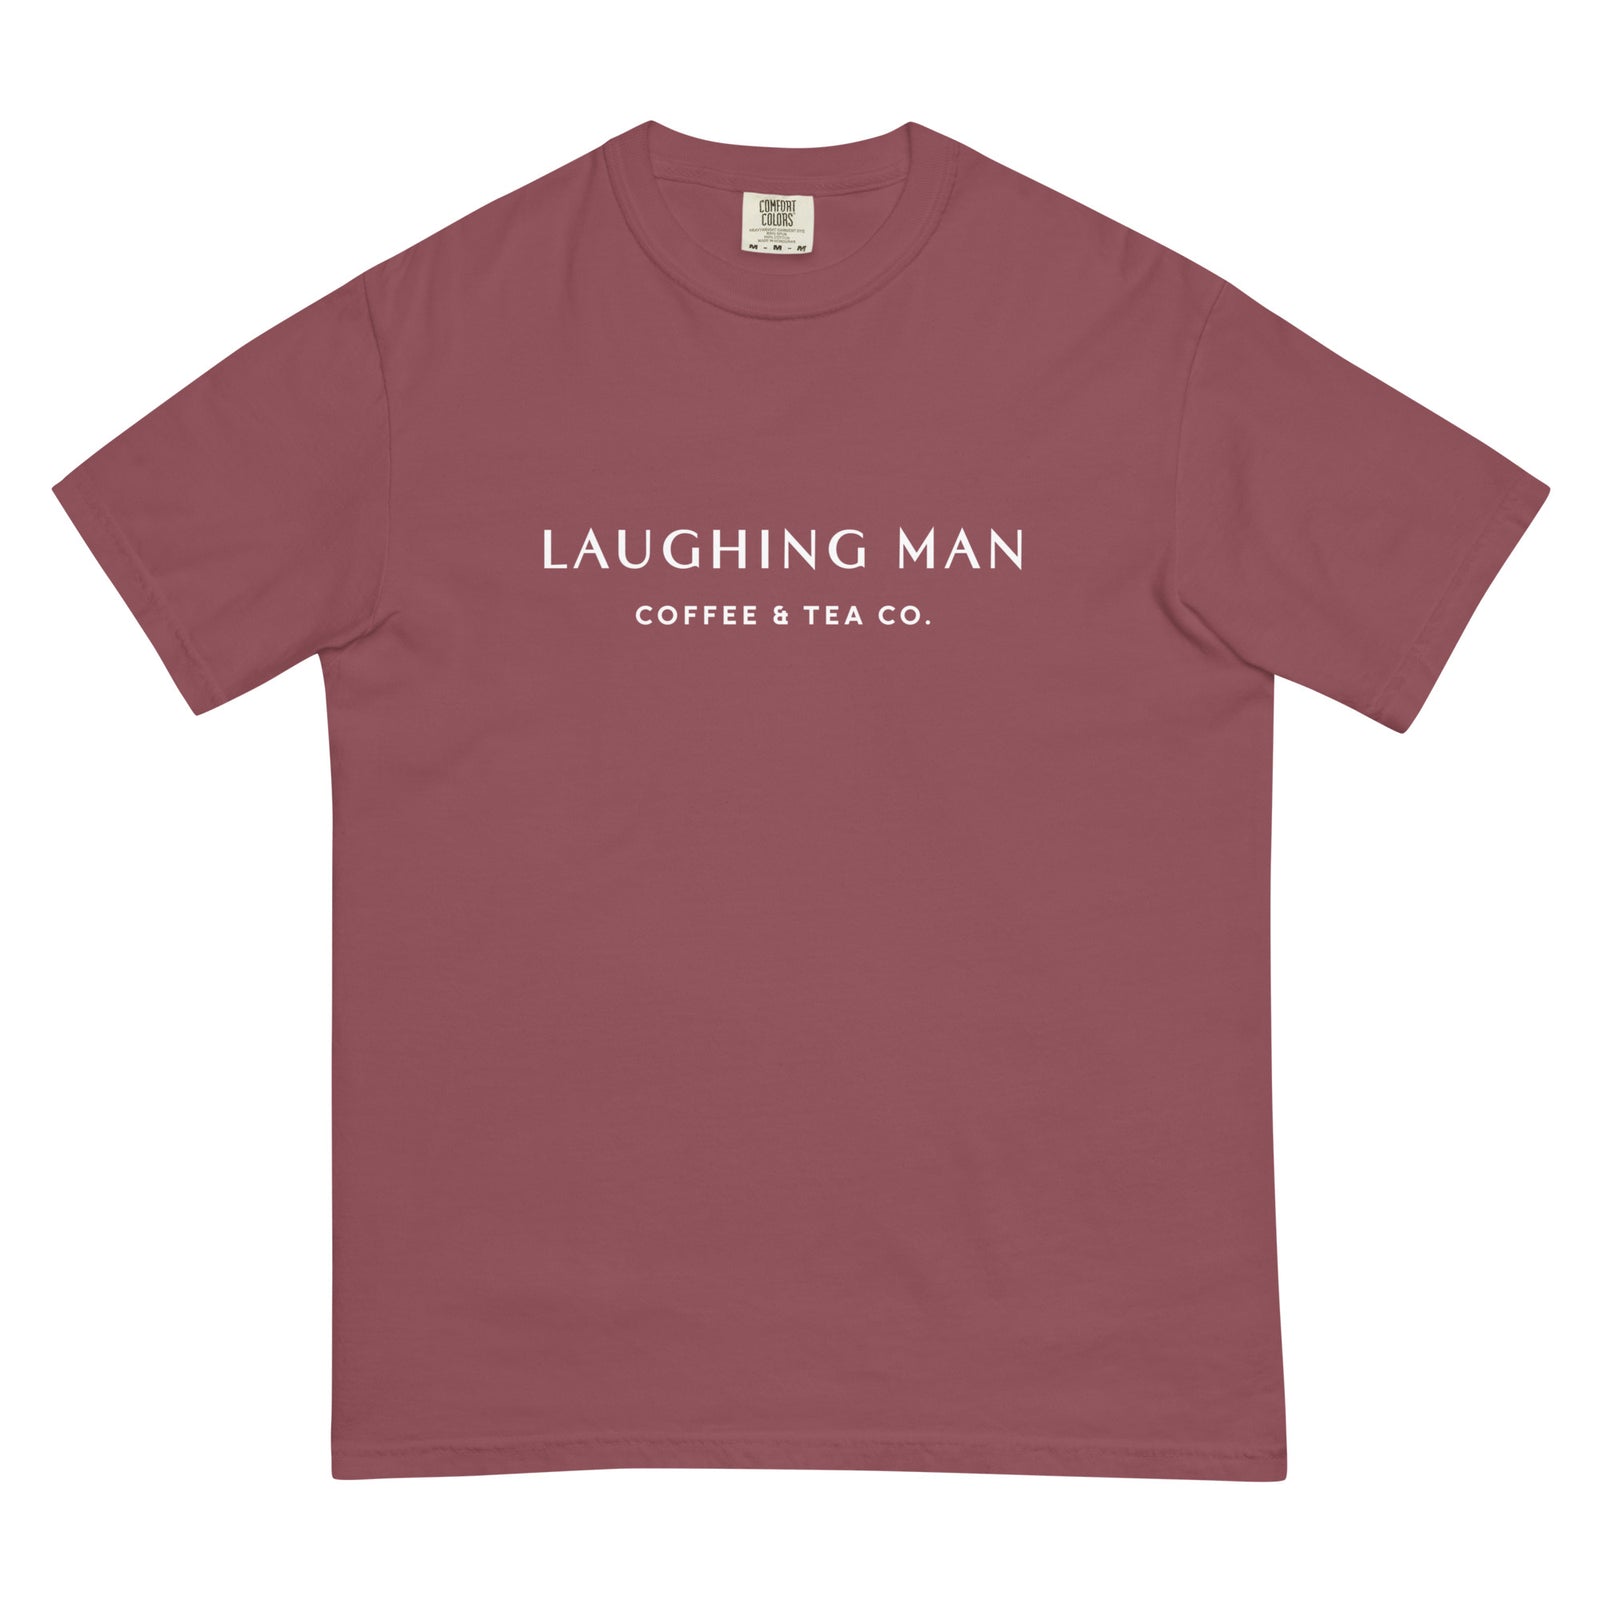 Laughing Man Collections - Laughing Man Coffee